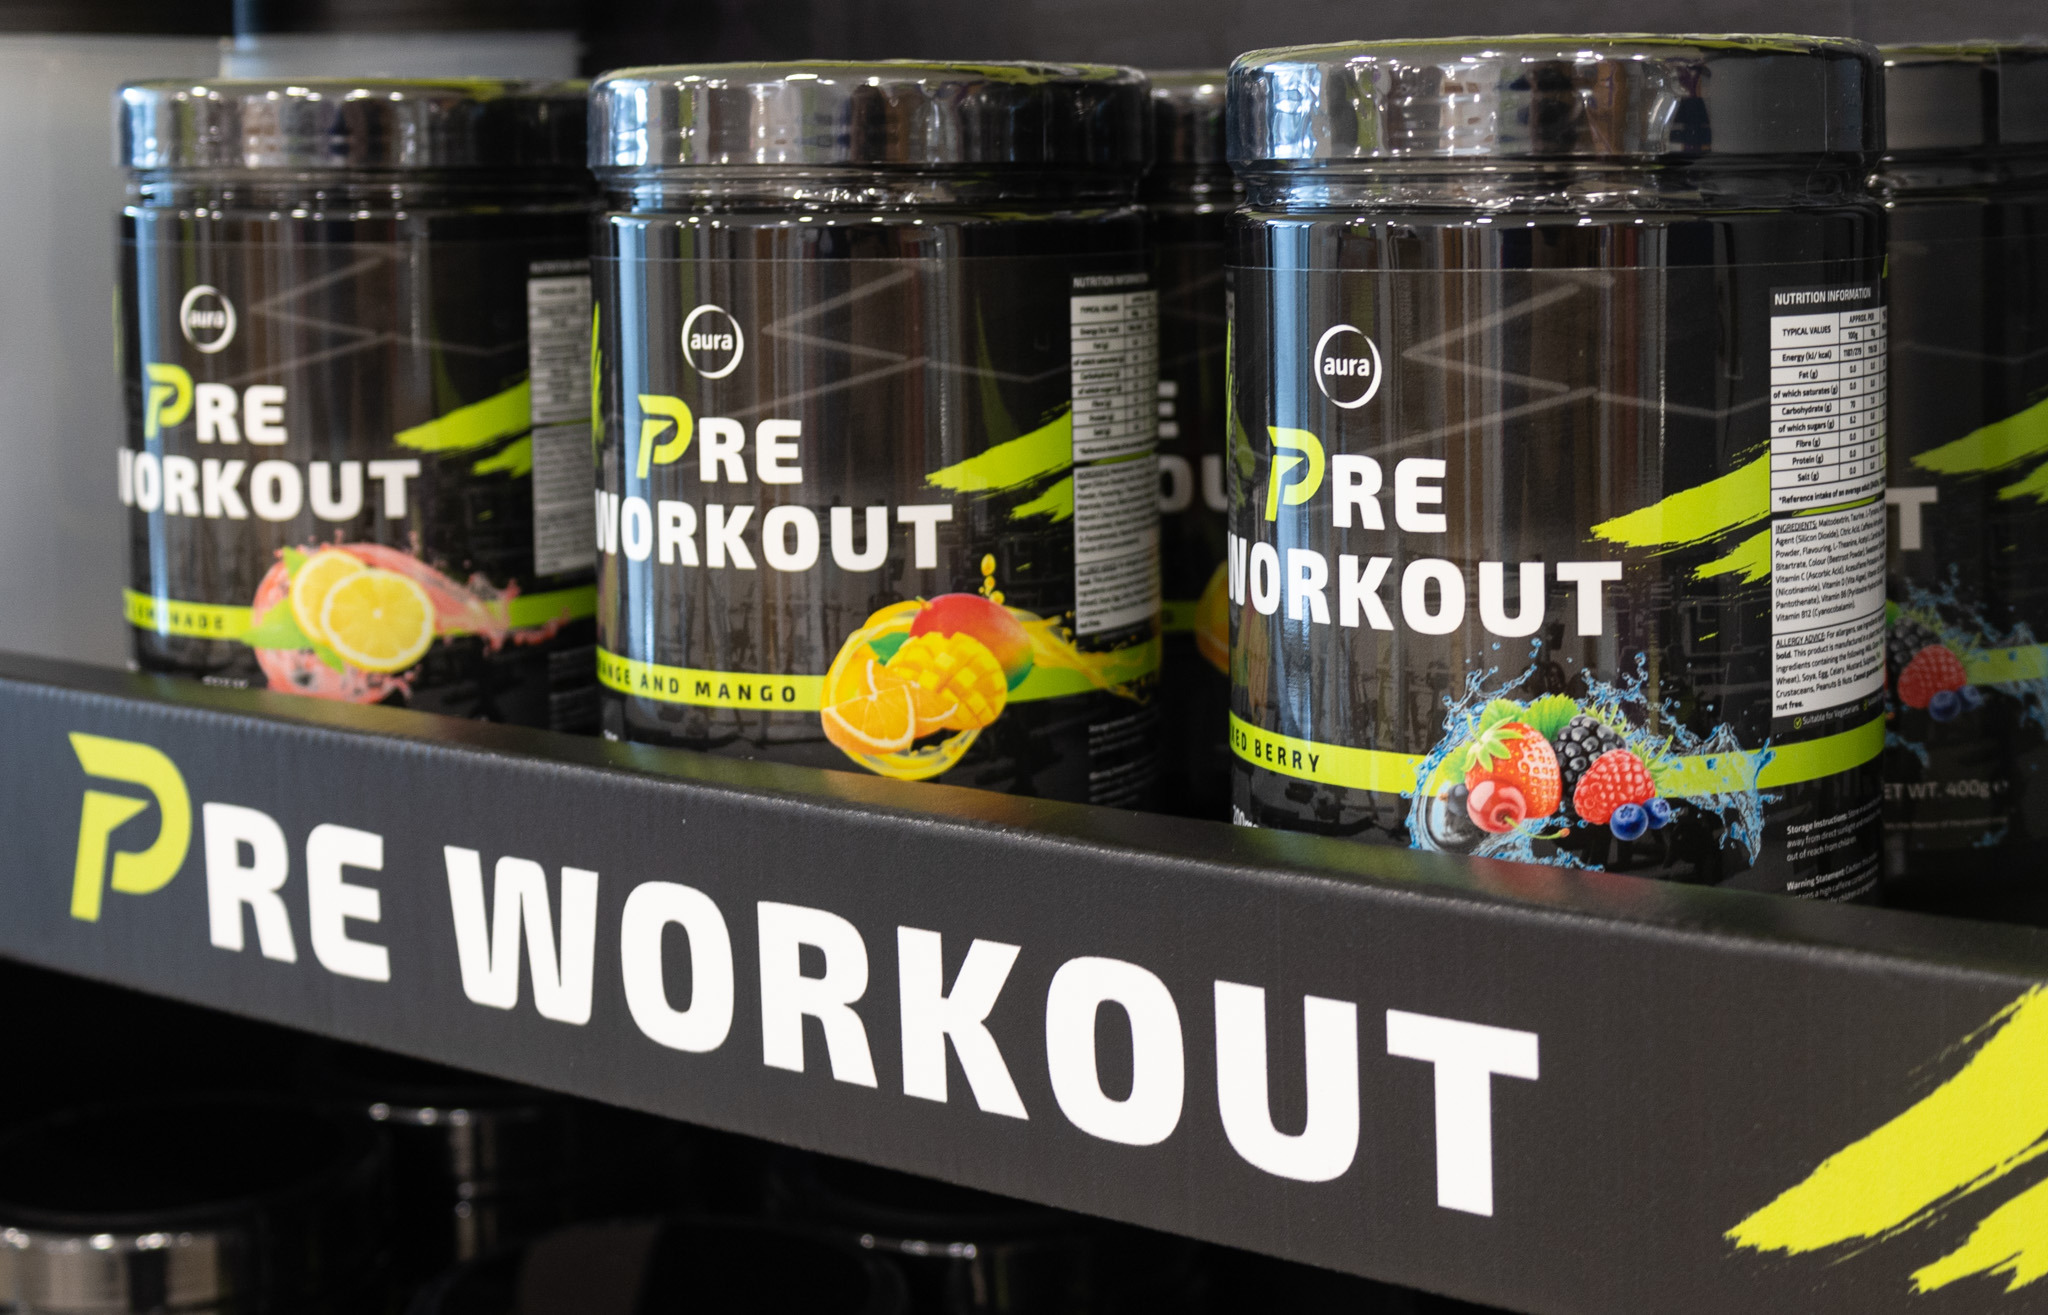 What is Pre-Workout? What Does Pre-workout Do?